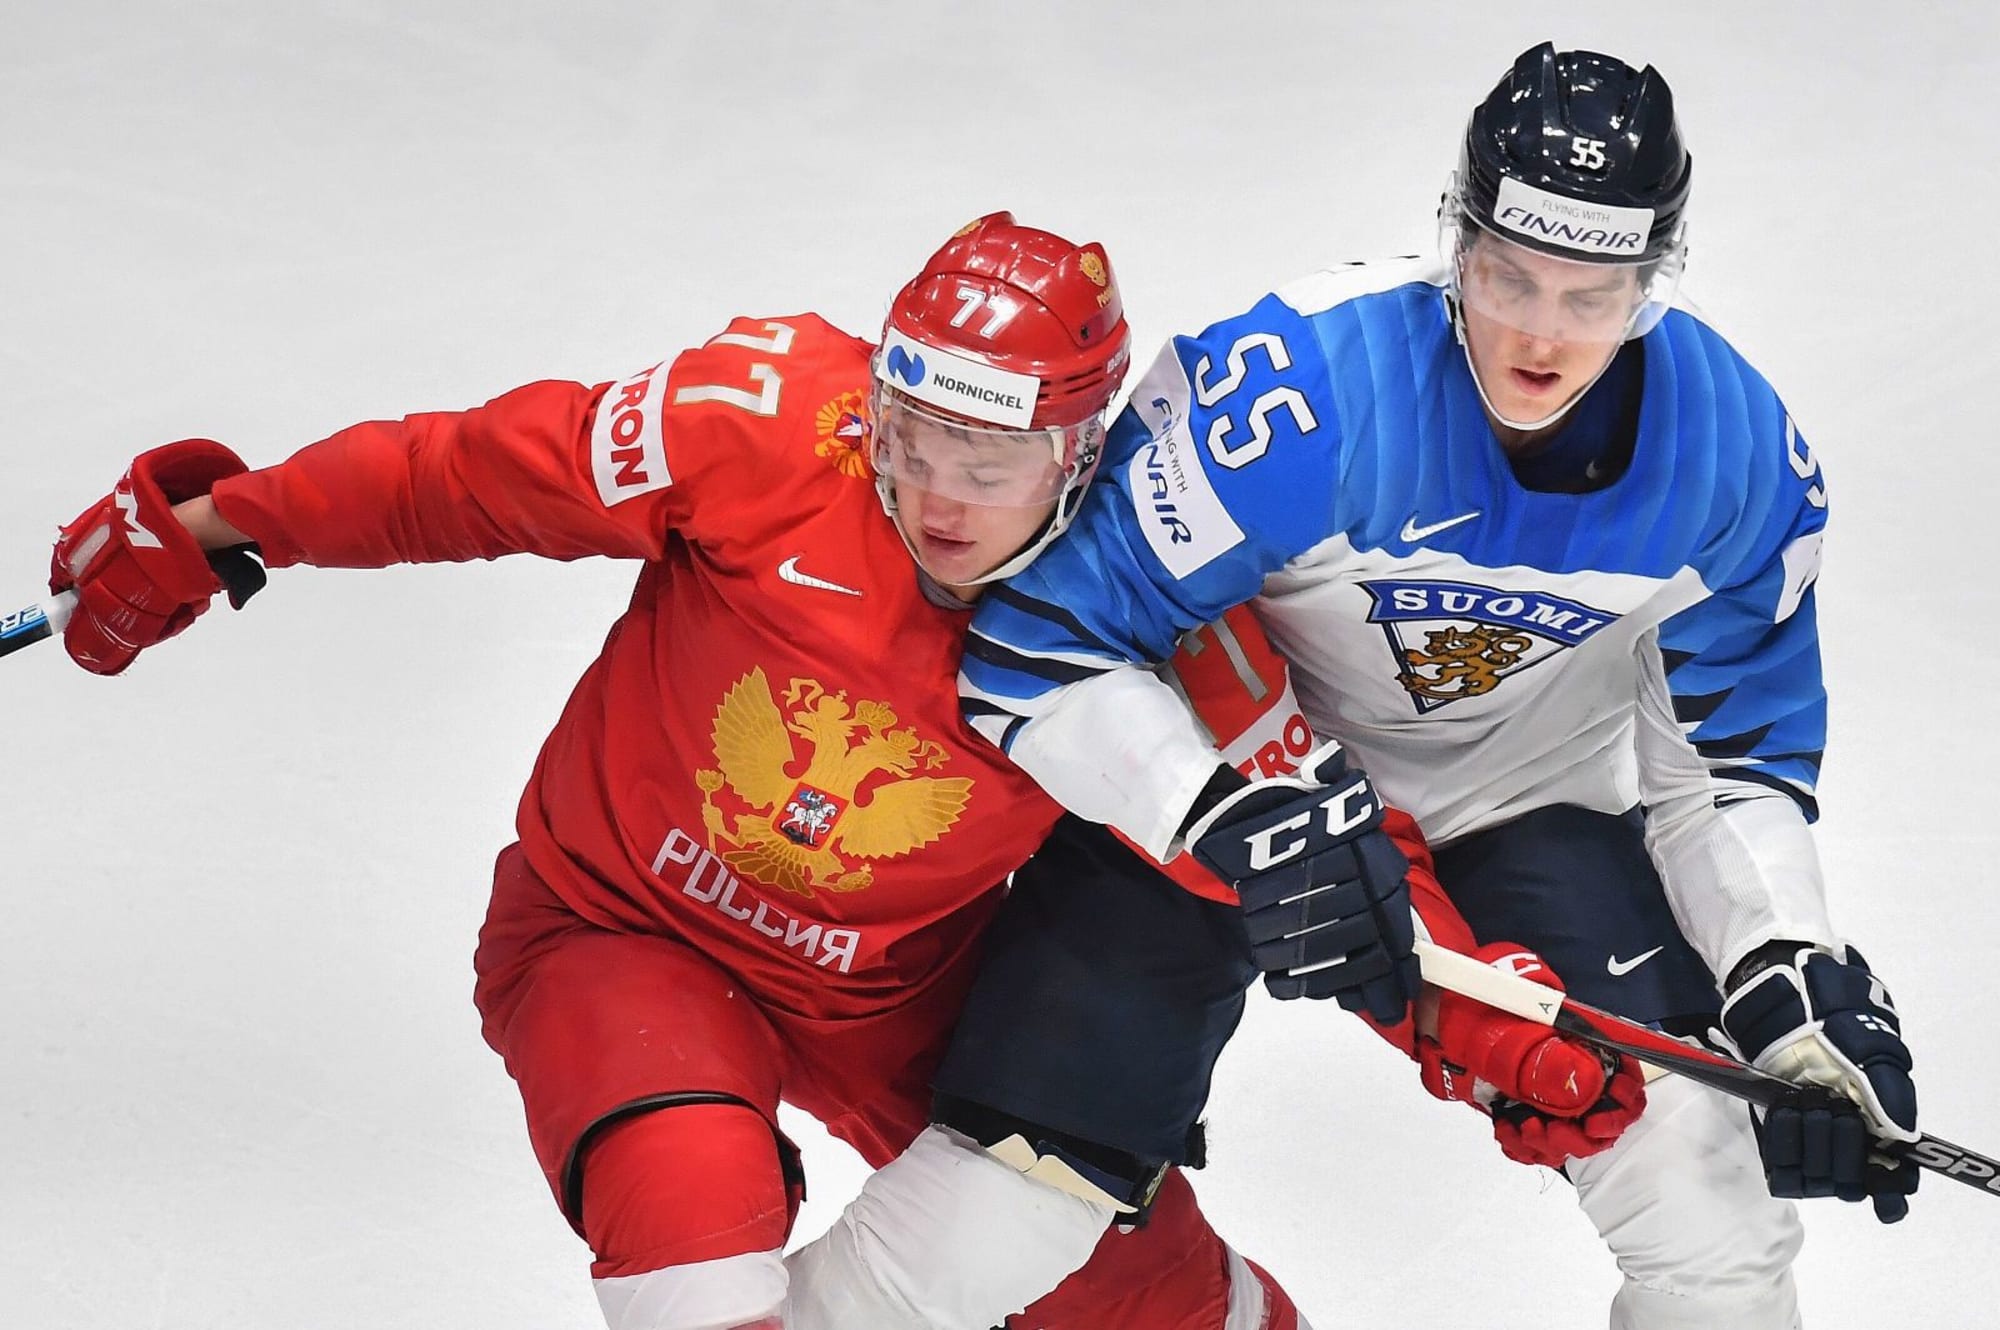 Wild prized prospect Kirill Kaprizov is in town. What's next for him?